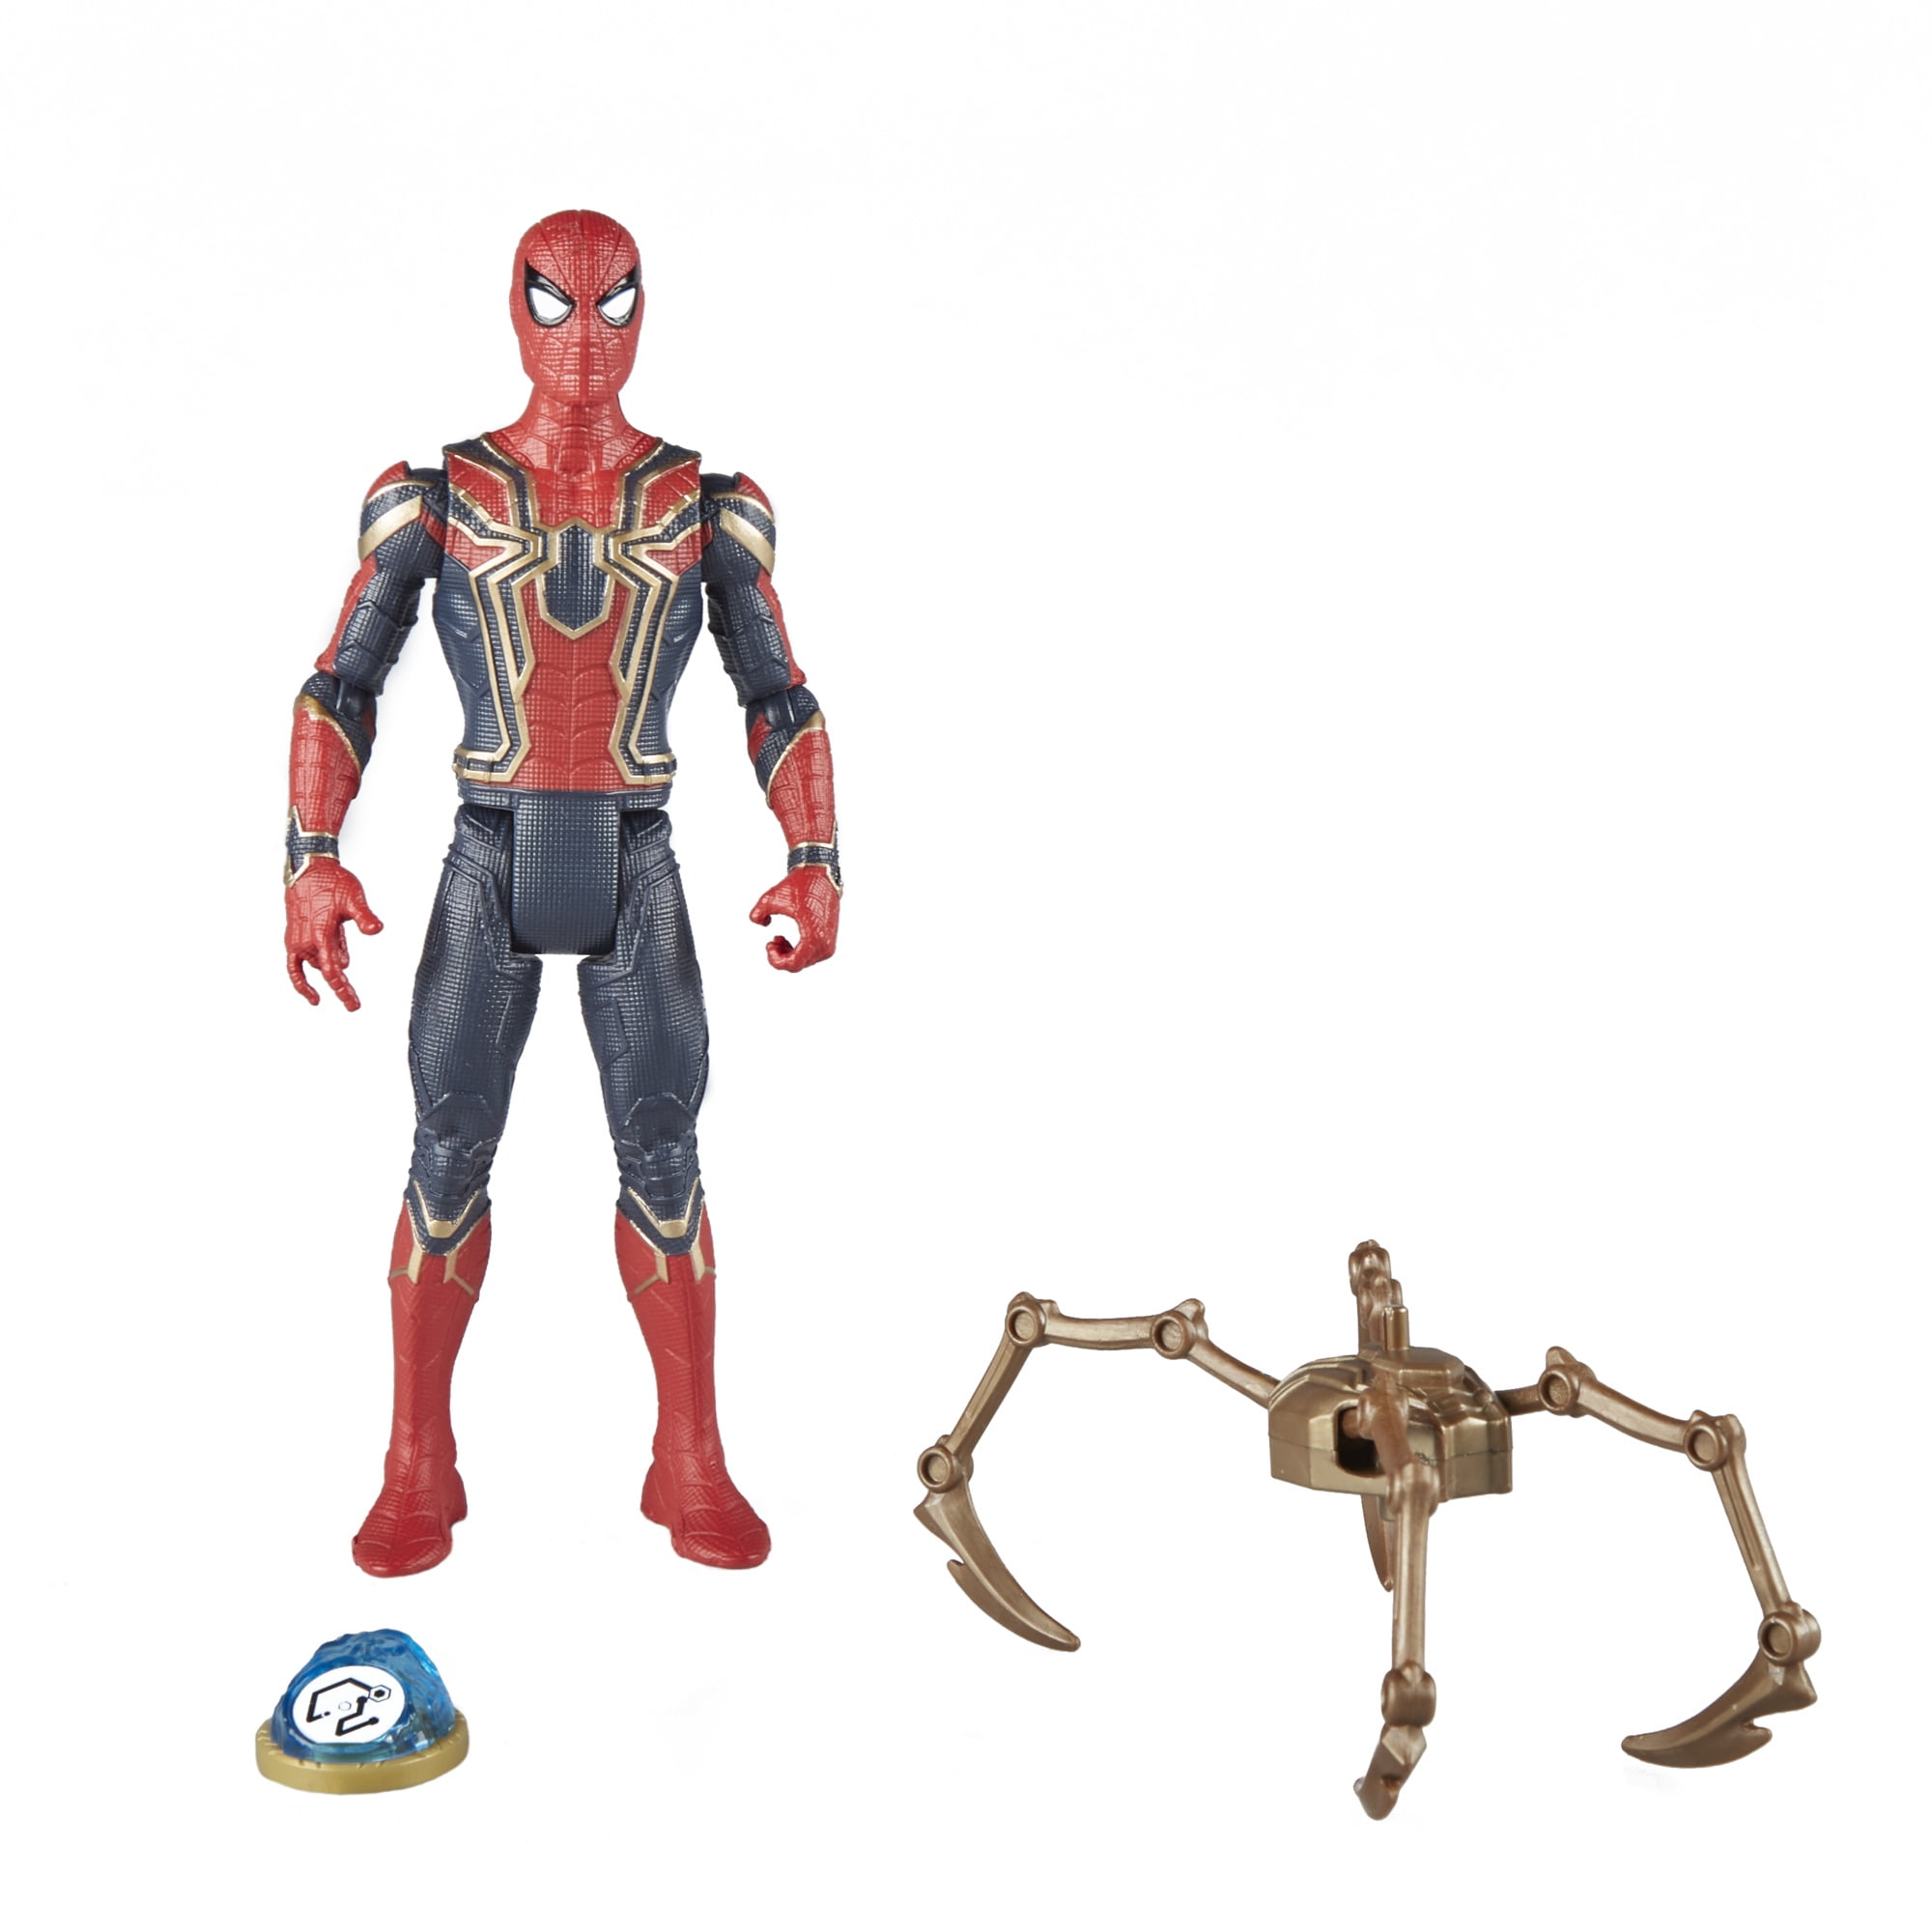 Details about   NEW Marvel Avengers Infinity War IRON SPIDER w/Blue Infinity Stone 6" Figure 